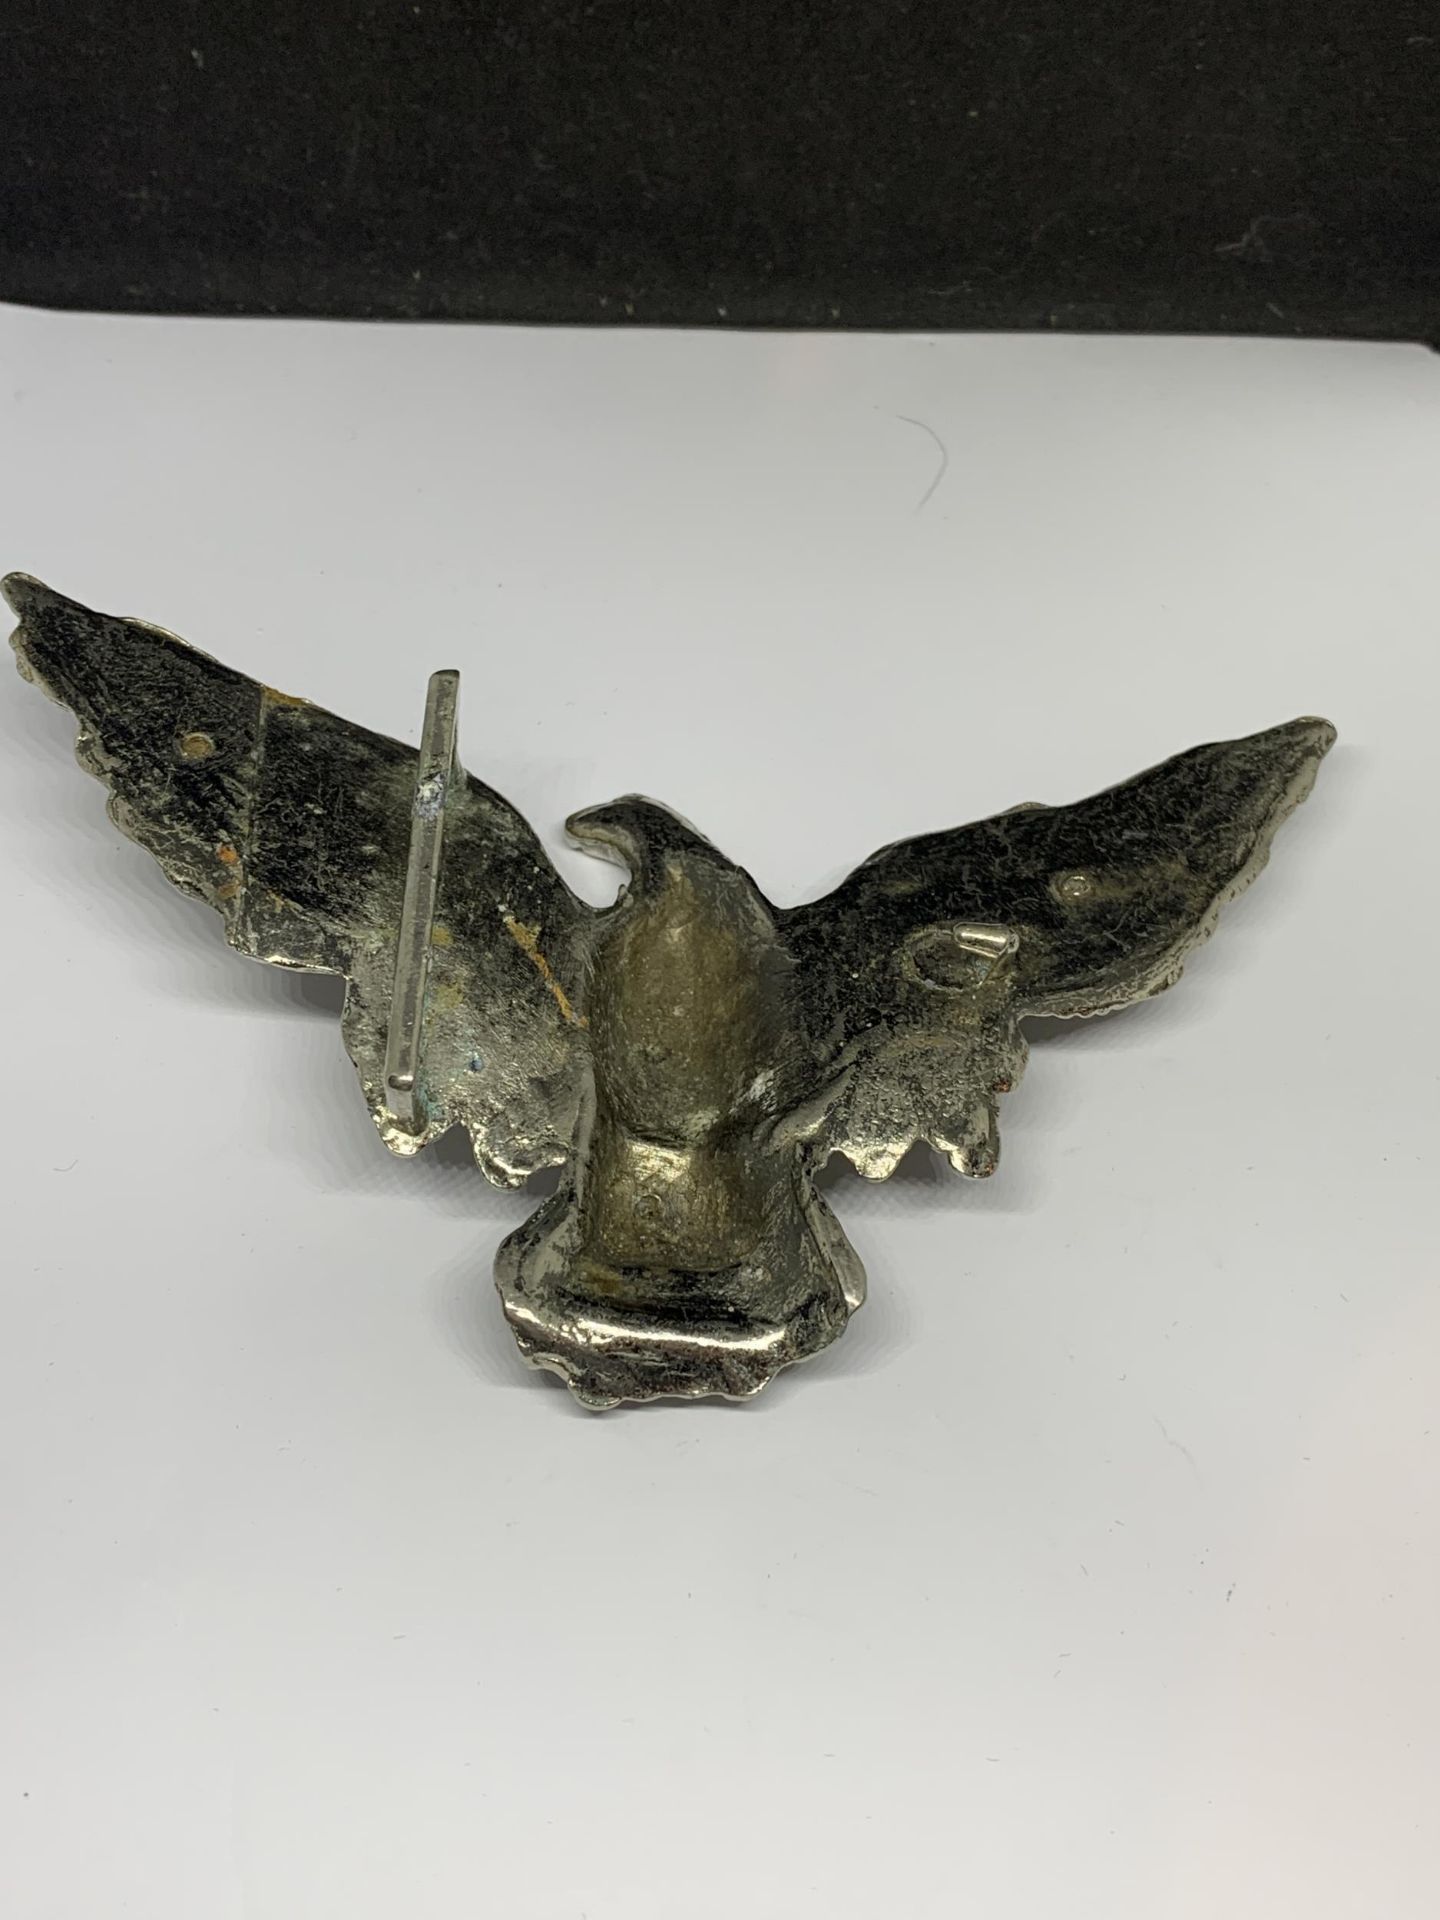 AN AMERICAN EAGLE BELT BUCKLE - Image 2 of 3